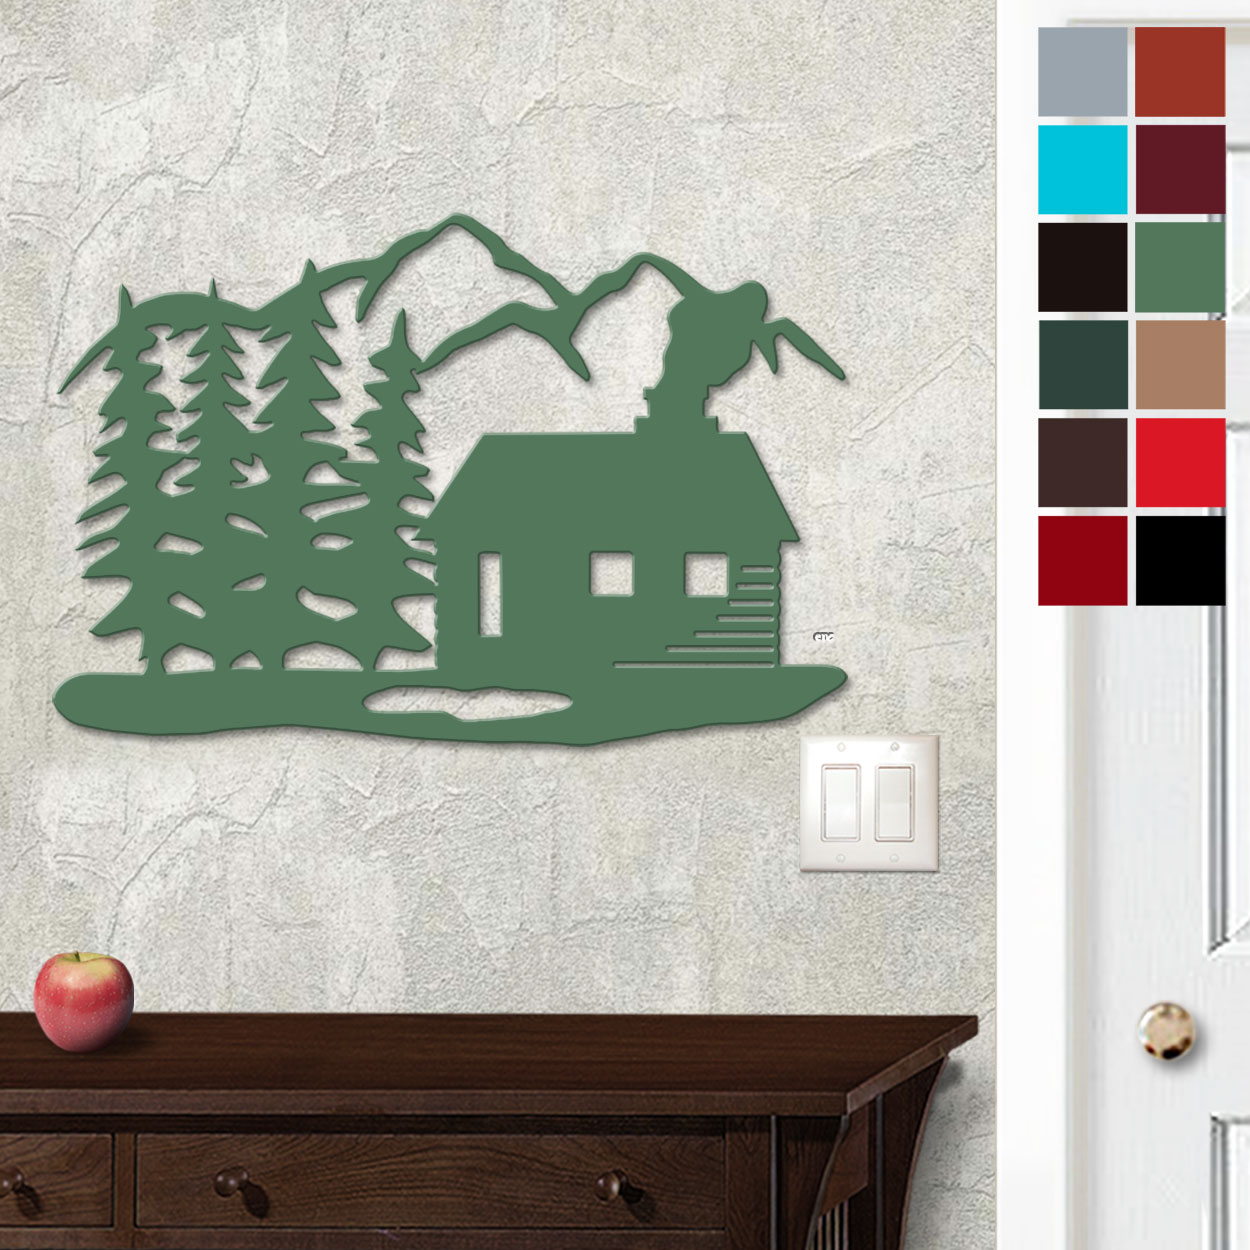 625036 - 18in or 24in Floating Metal Wall Art - Mountain Cabin - Choose Color